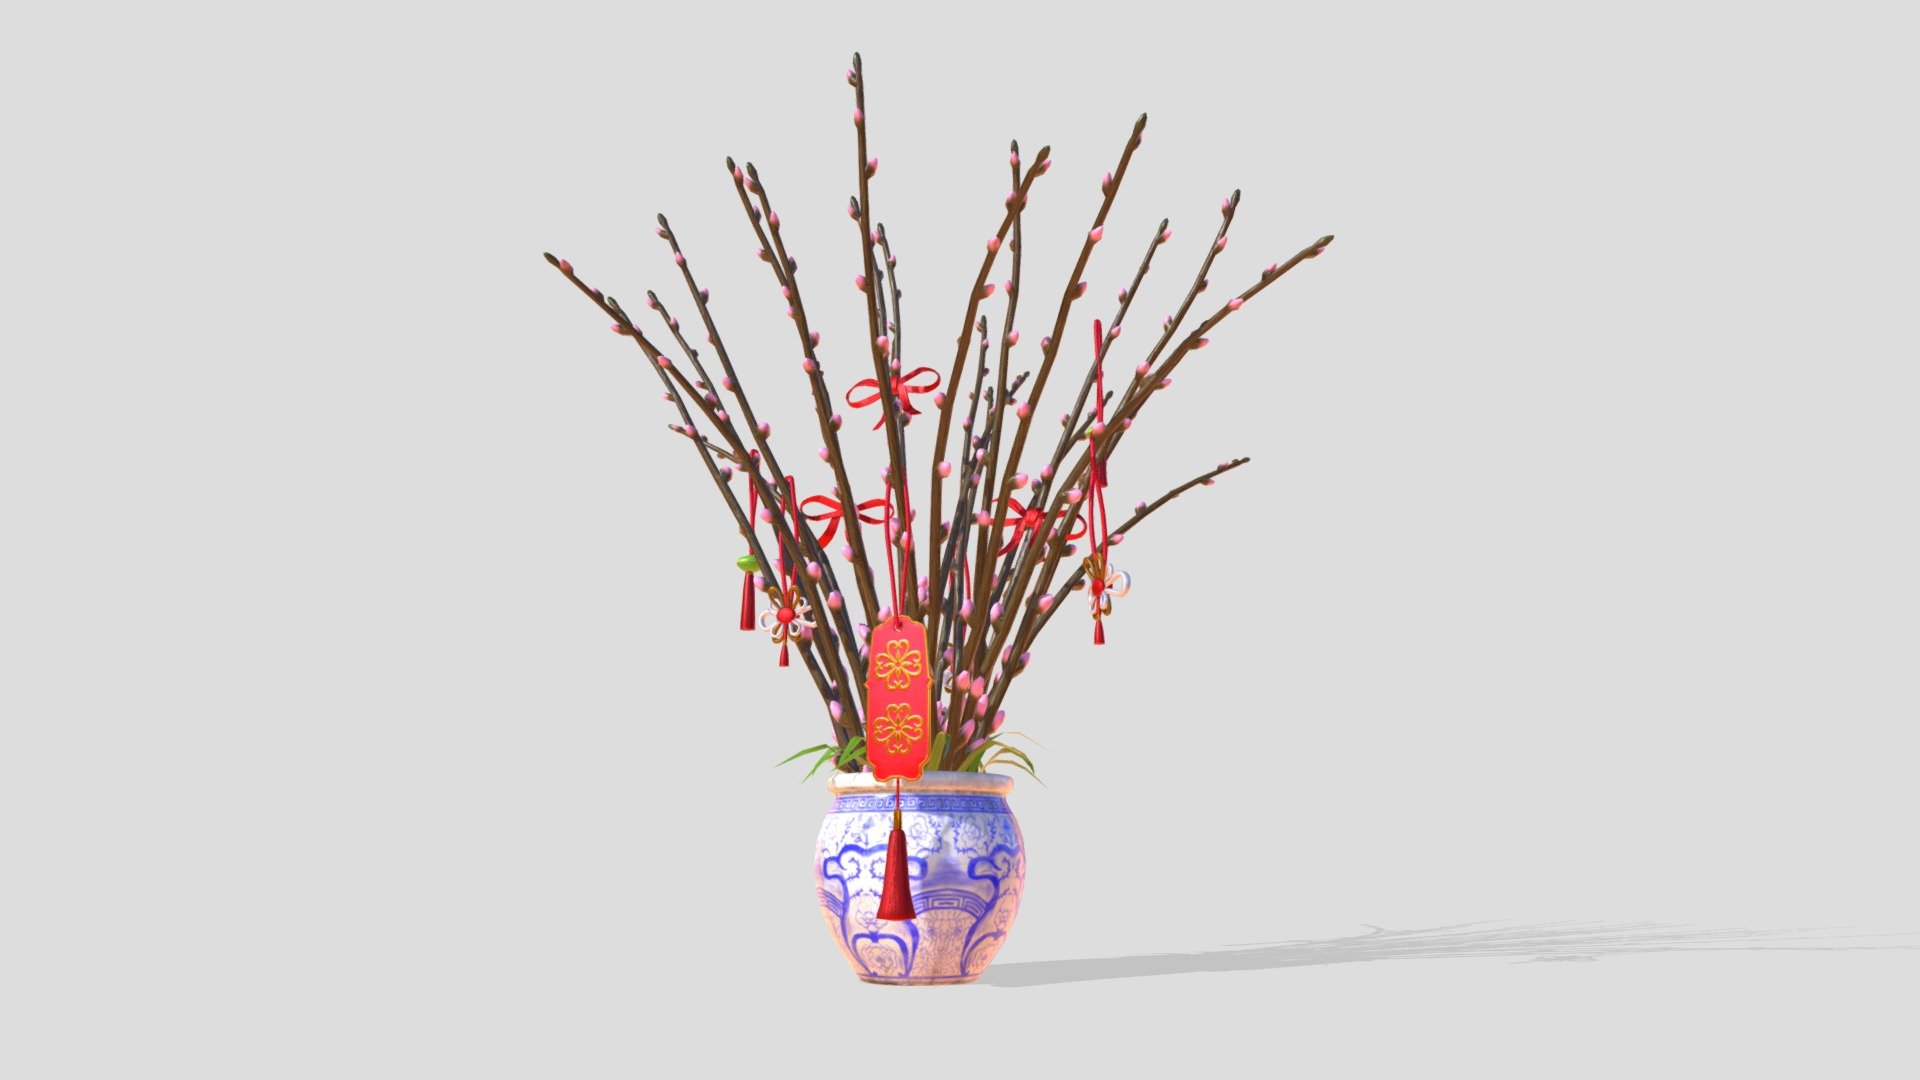 Realistic Chinese new year plant in an oriental vase, with hanging red decorations.
Animations included: Swaying (Loop)

Login to STB’s Tourism Information &amp; Services Hub for free downloads:
https://tih.stb.gov.sg/content/tih/en/marketing-and-media-assets/digital-images-andvideoslisting/digital-images-and-videos-detail.104c94c752390b340998e4a5bb1a5d14f30.Chinese+New+Year+Plant.html - Chinese New Year Plant - 3D model by STB-TC 3d model